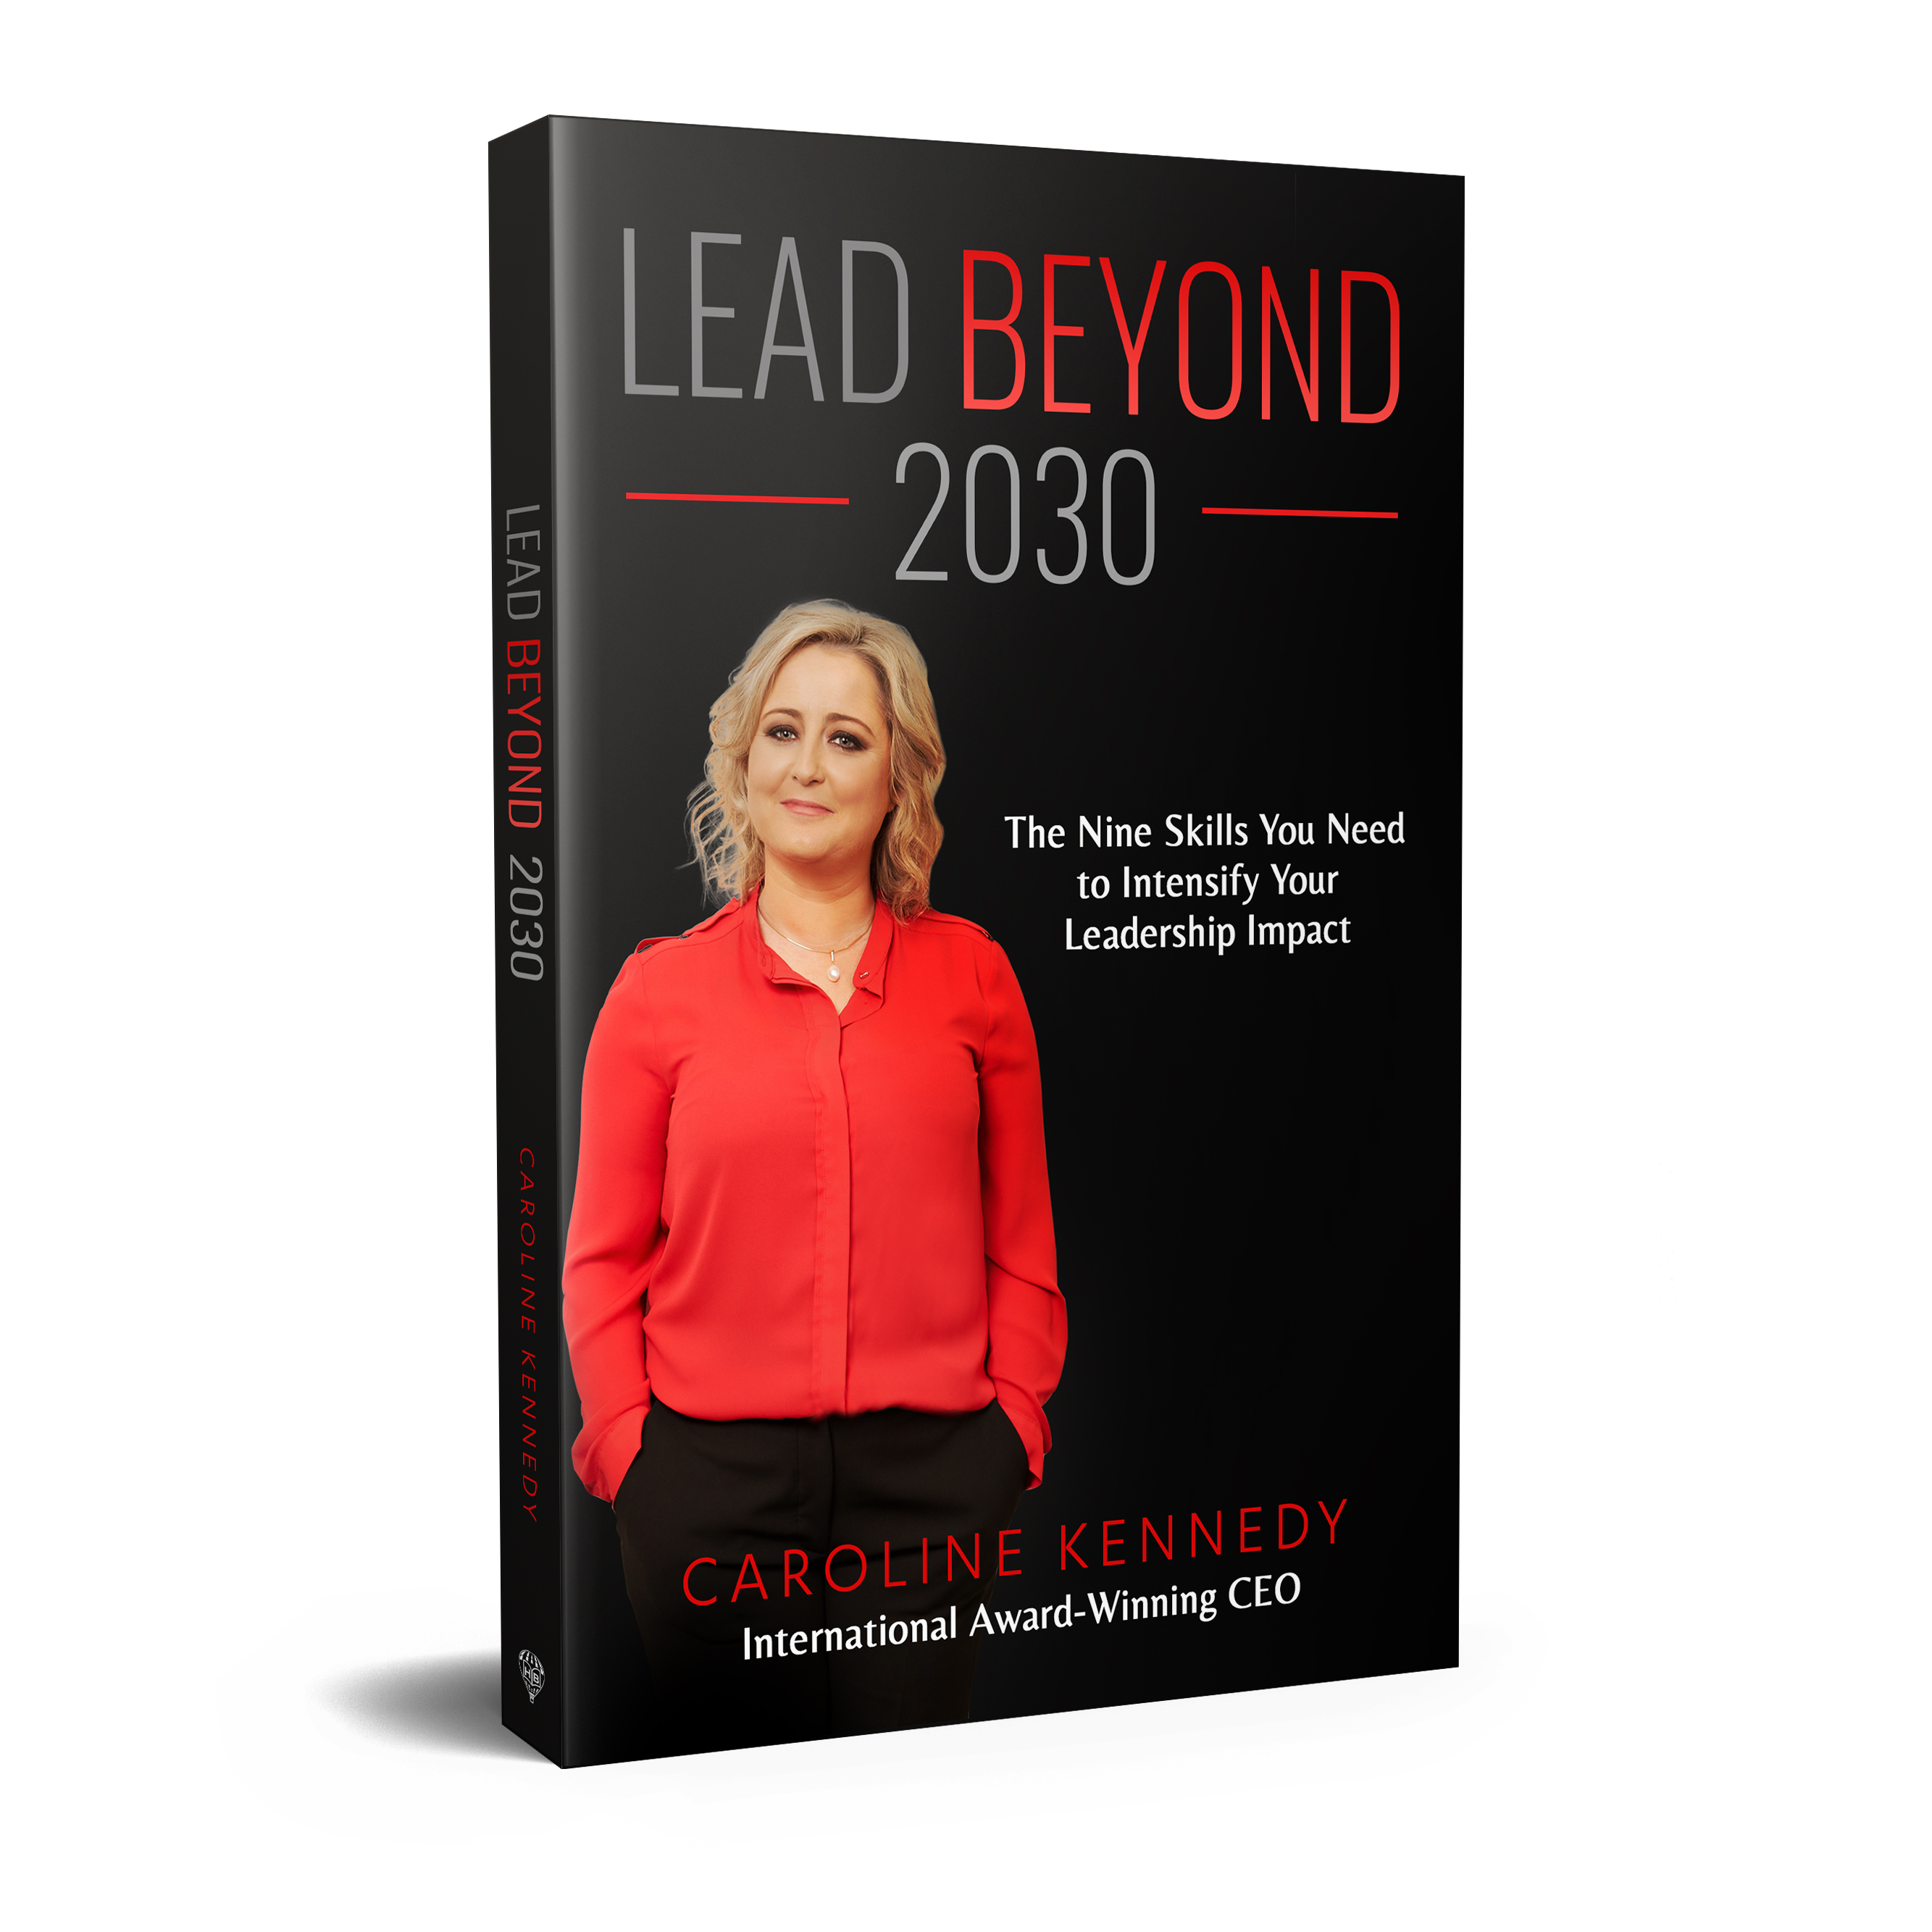 Lead Beyond 2030 - The Nine skills you need to intensify your leadership impact.